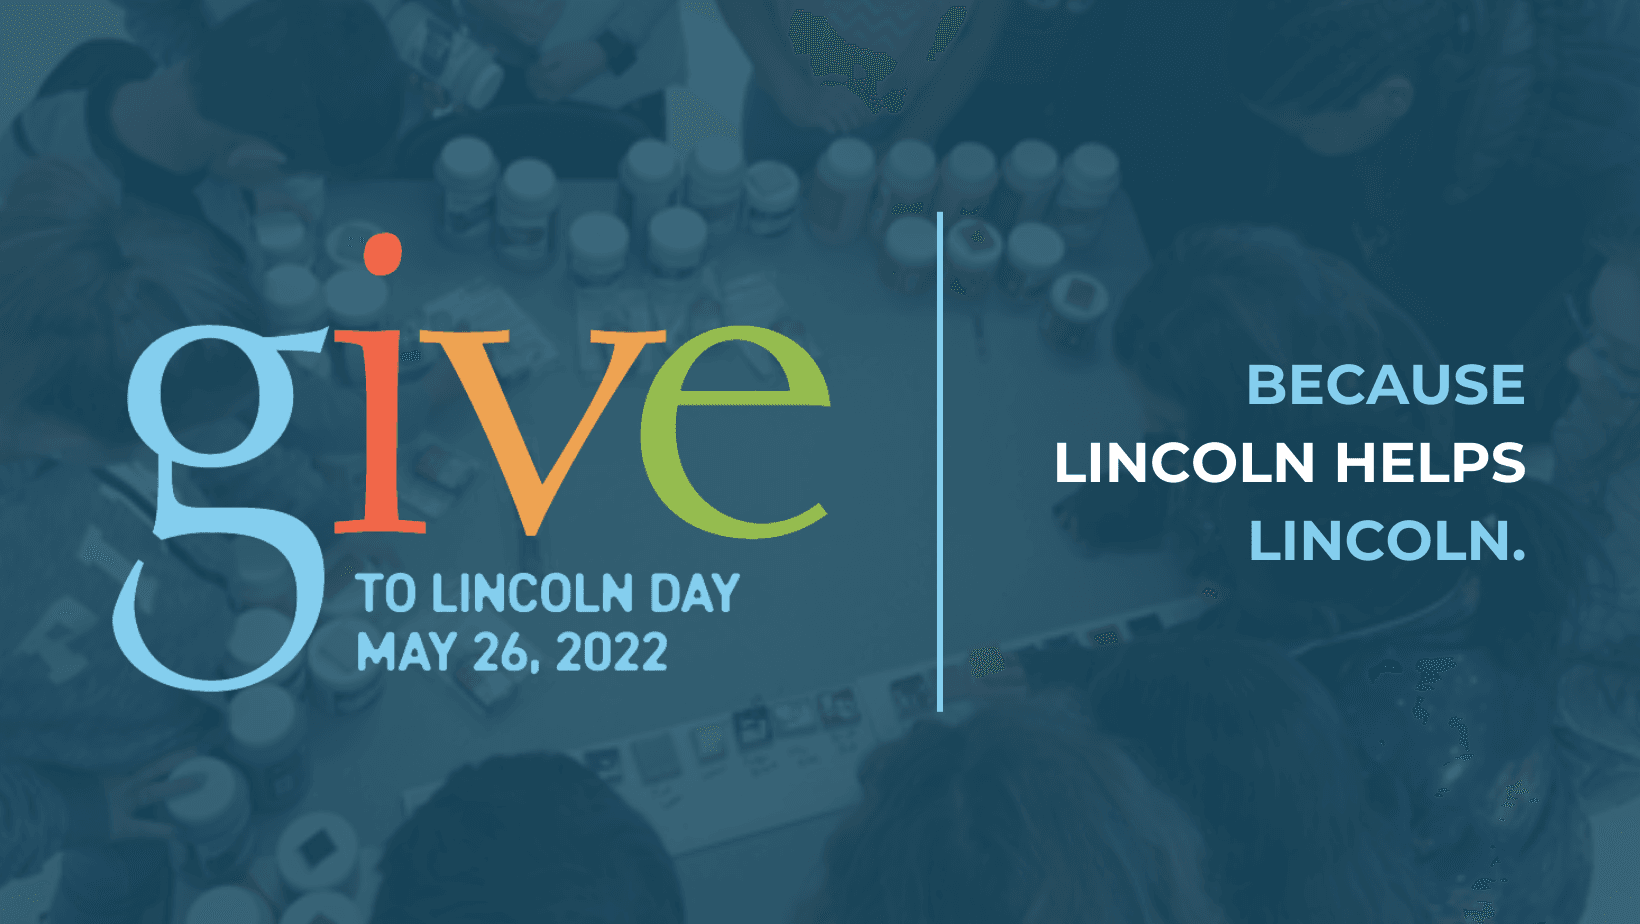 GIVE TO LINCOLN DAY